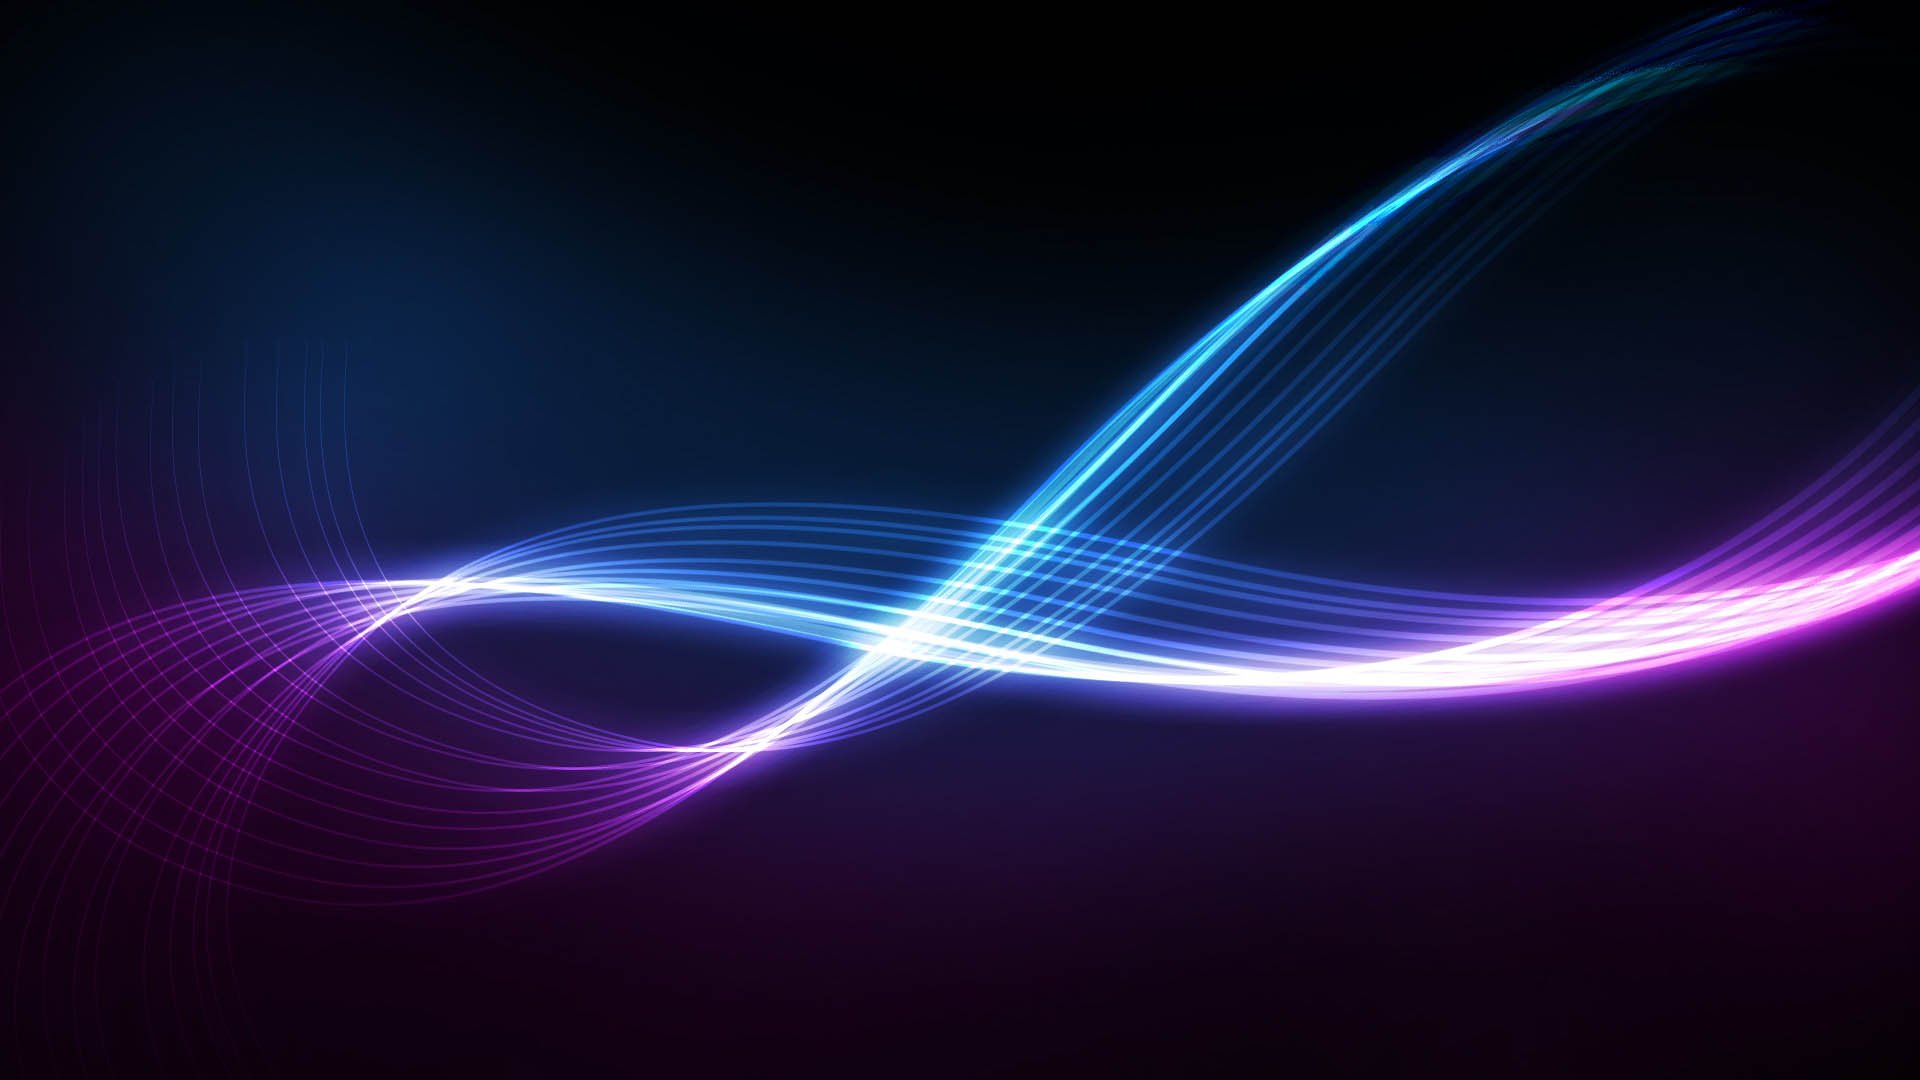 Abstract 1080p   Wallpaper High Definition High Quality Widescreen